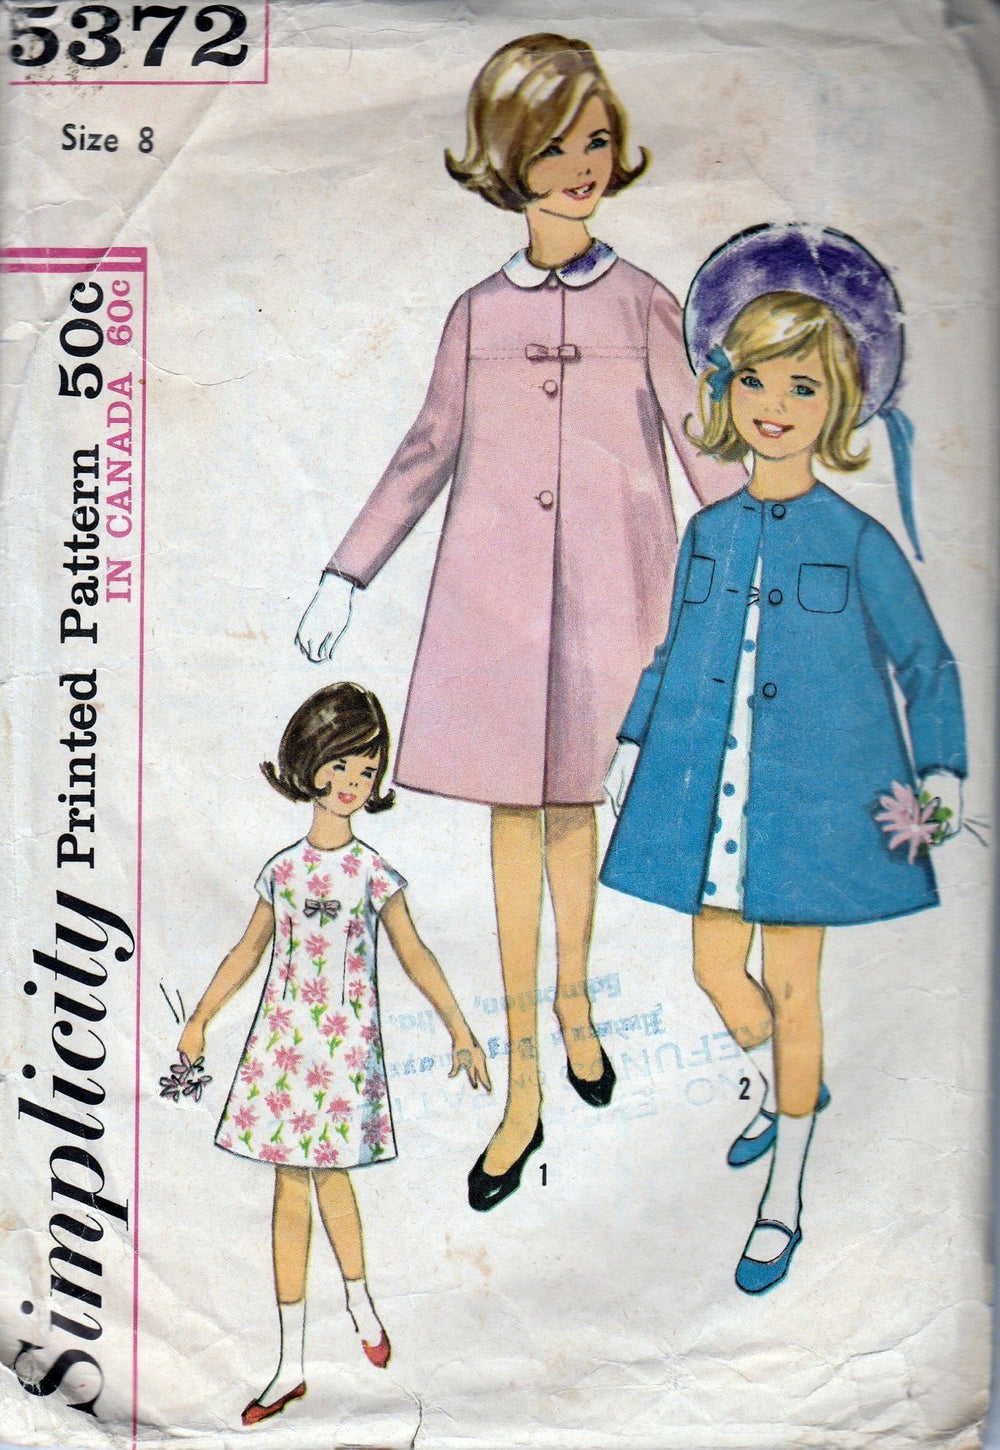 Simplicity 5372 Vintage 1960's Sewing Pattern Girls A-Line Dress Front Button Coat Detachable Collar - VintageStitching - Vintage Sewing Patterns